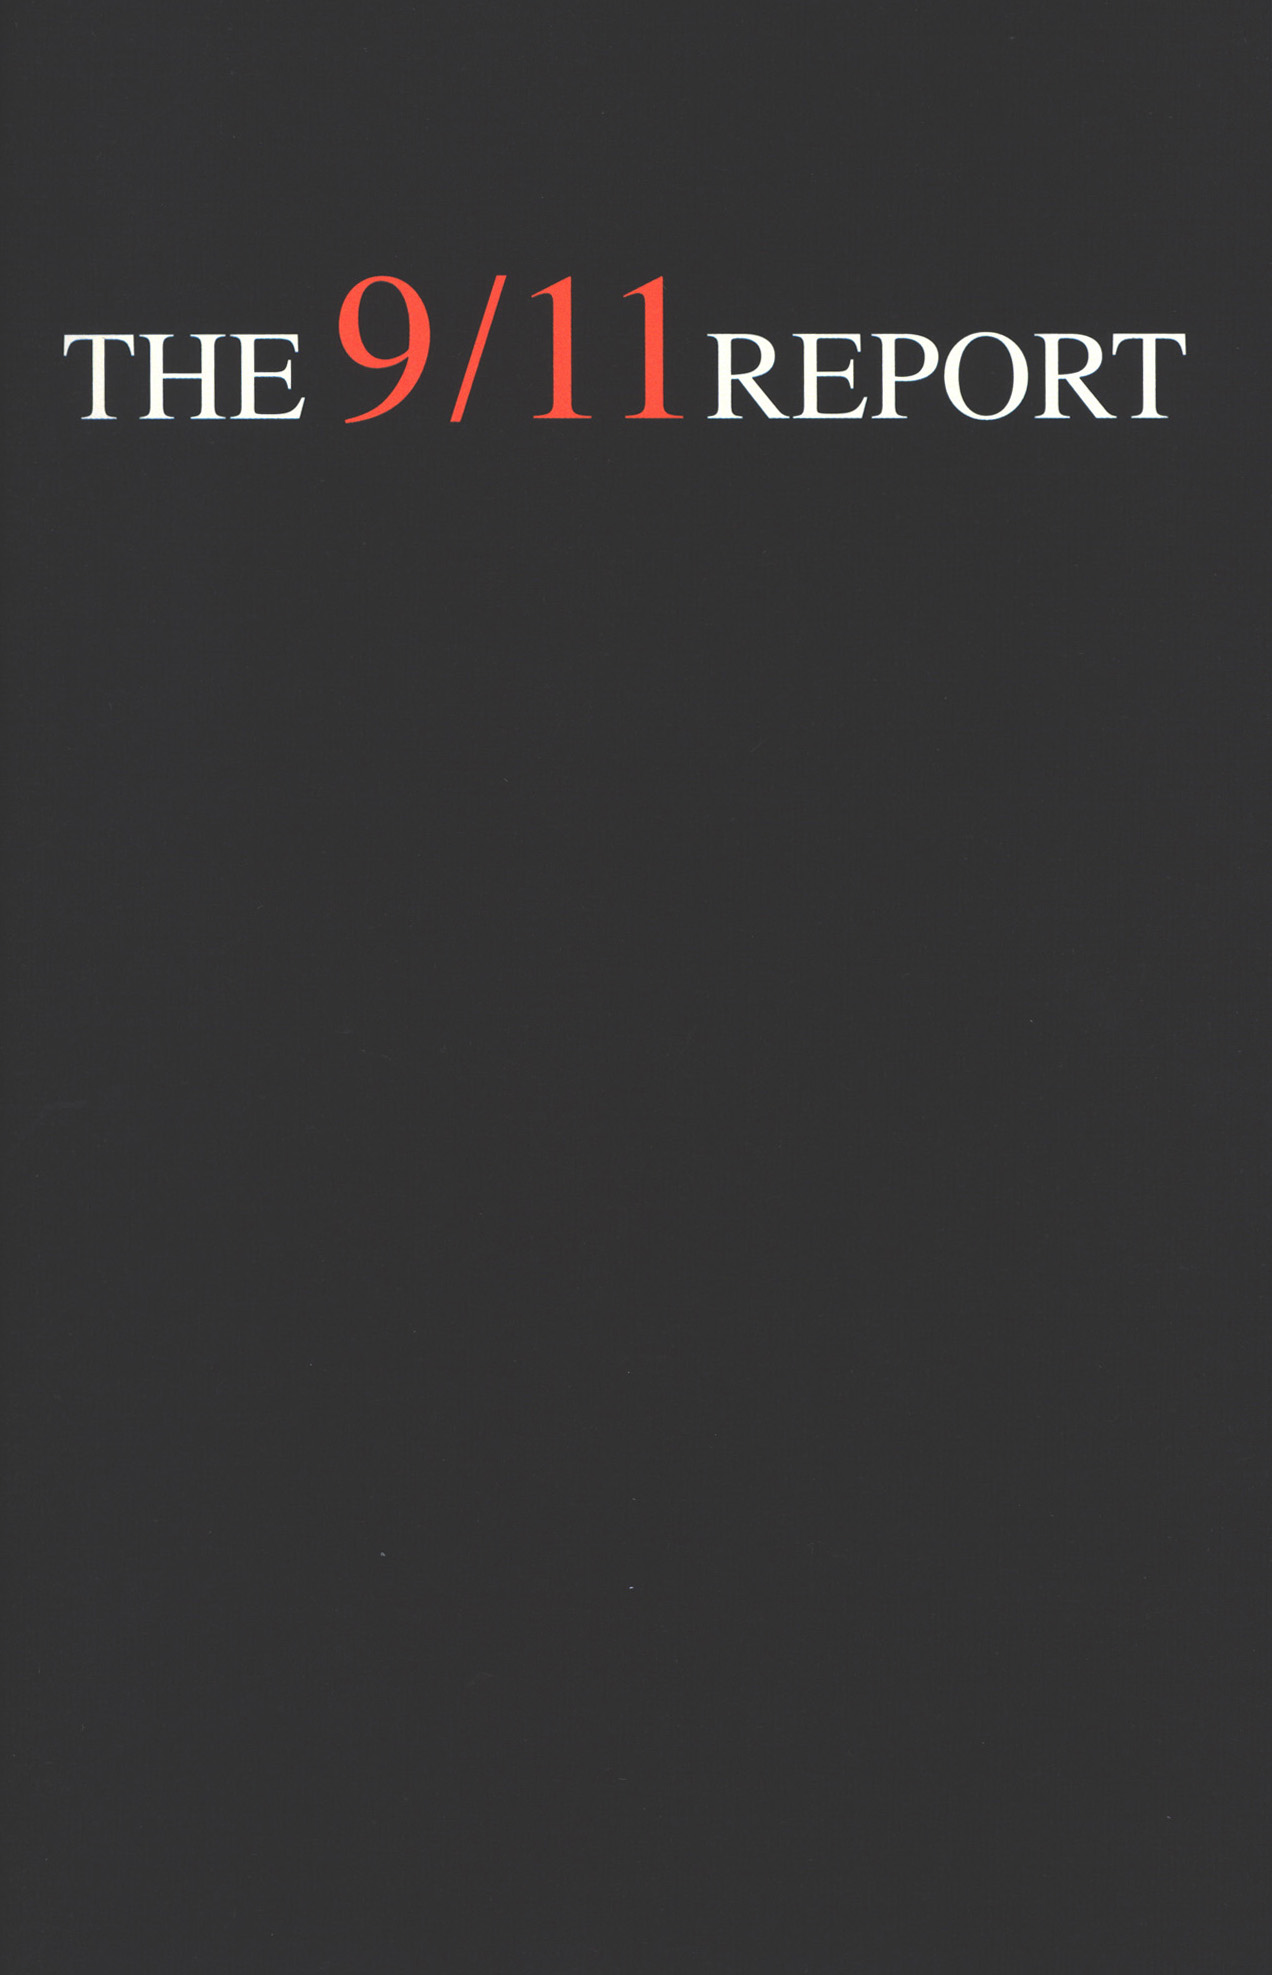 Read online The 9/11 Report comic -  Issue # TPB - 13